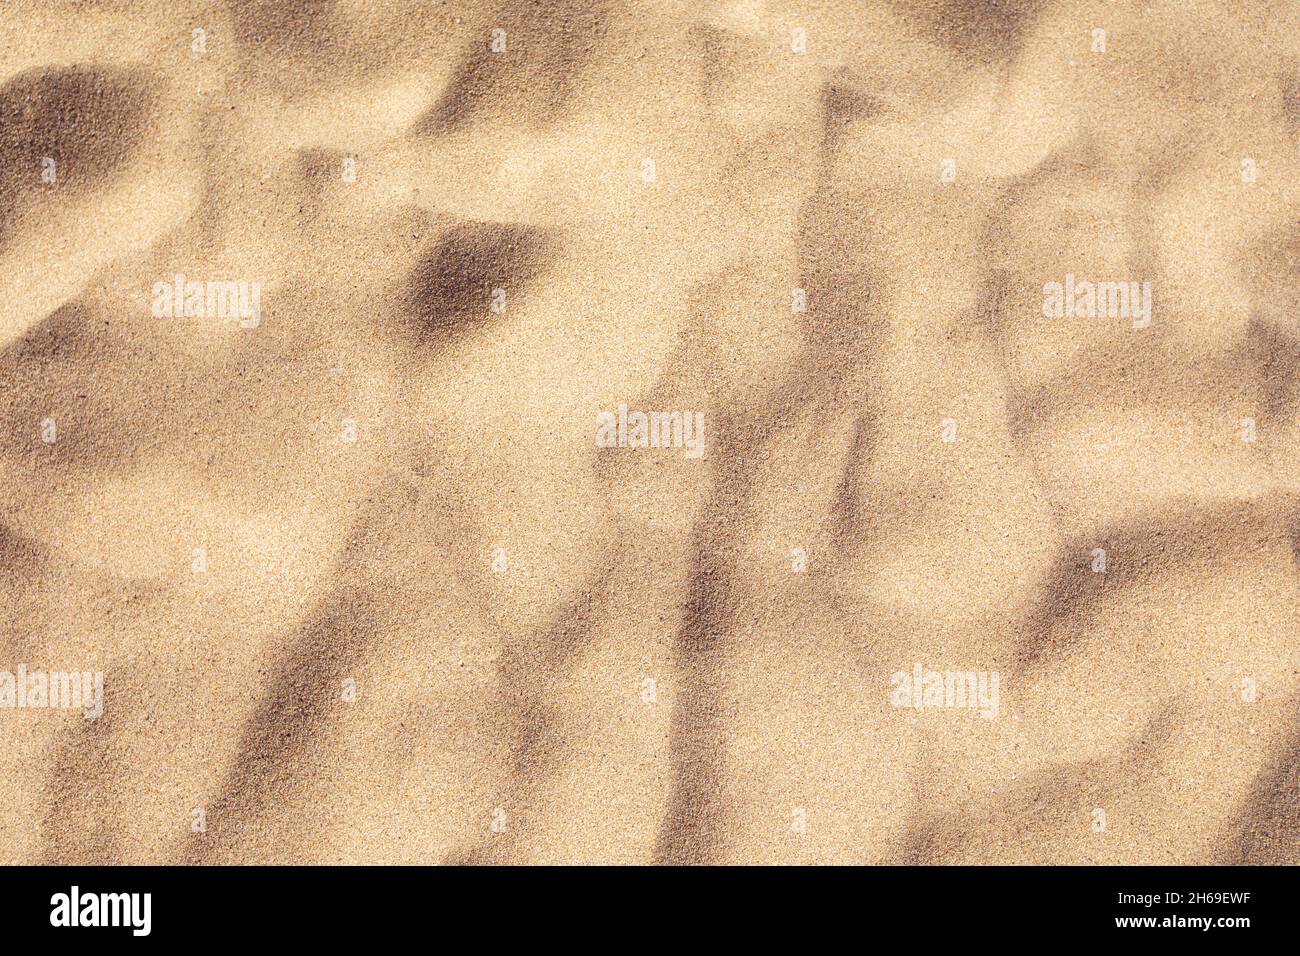 Sand on the beach background Stock Photo